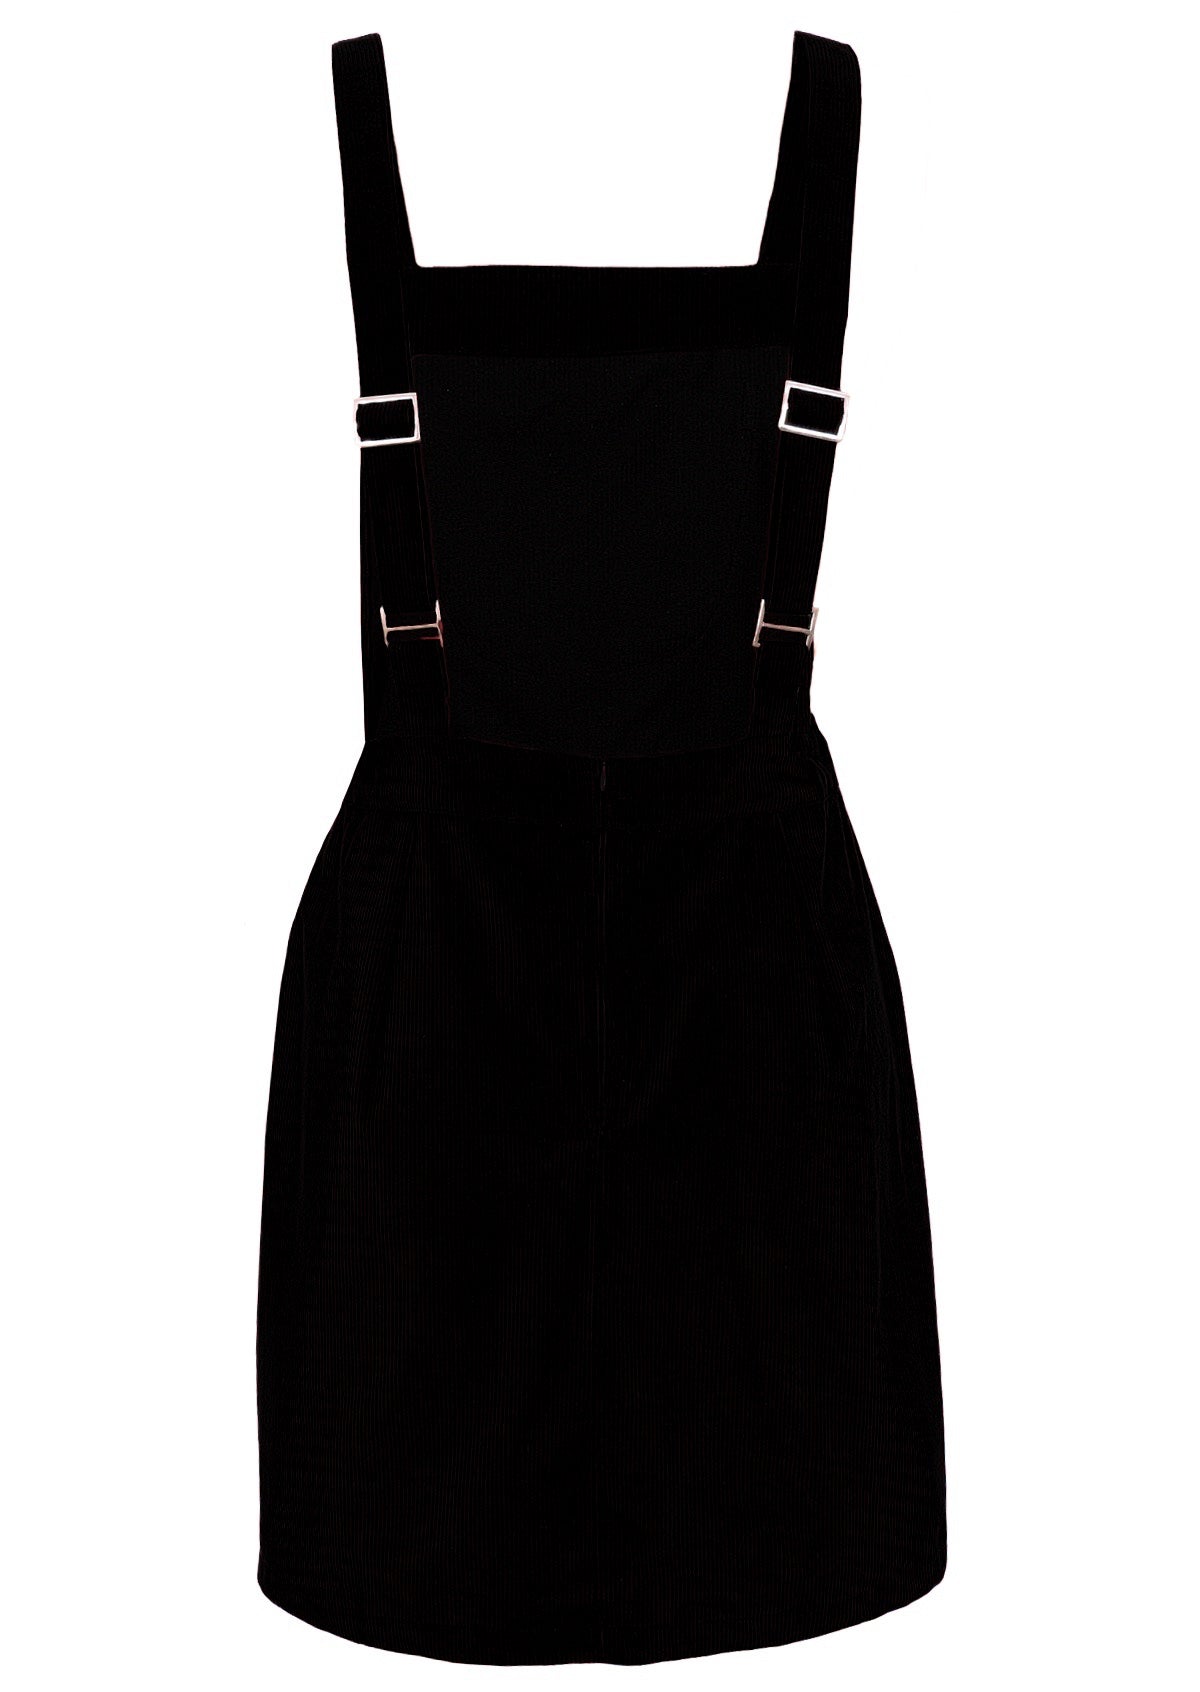 100% cotton corduroy black pinafore with back middle zip